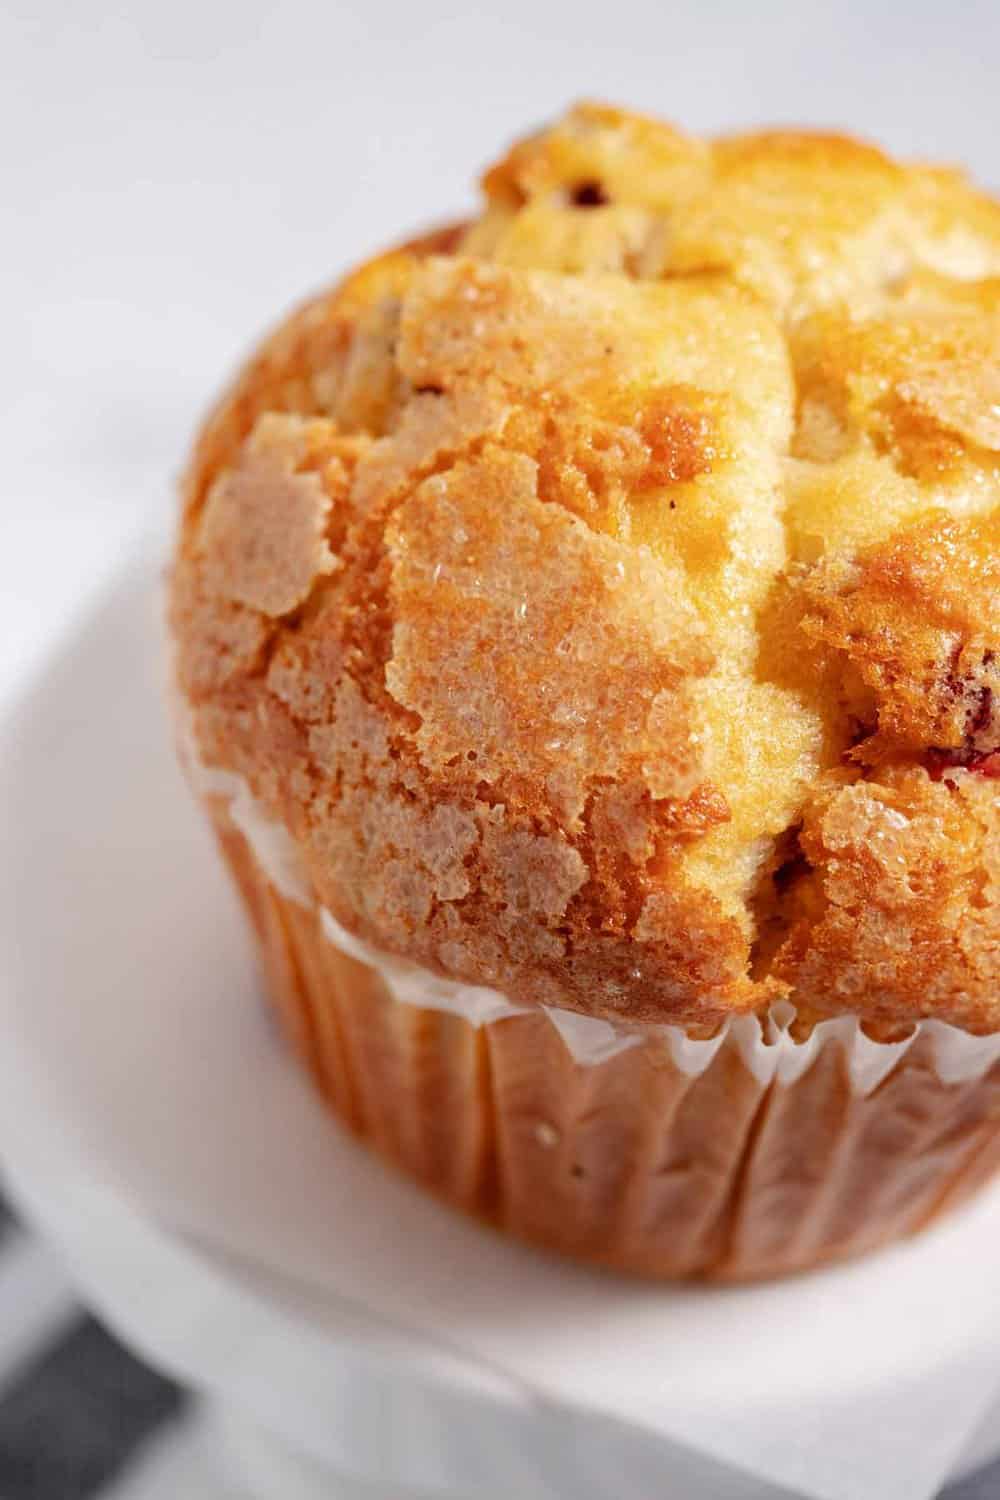 Bakery style muffin with crispy sugar topping.